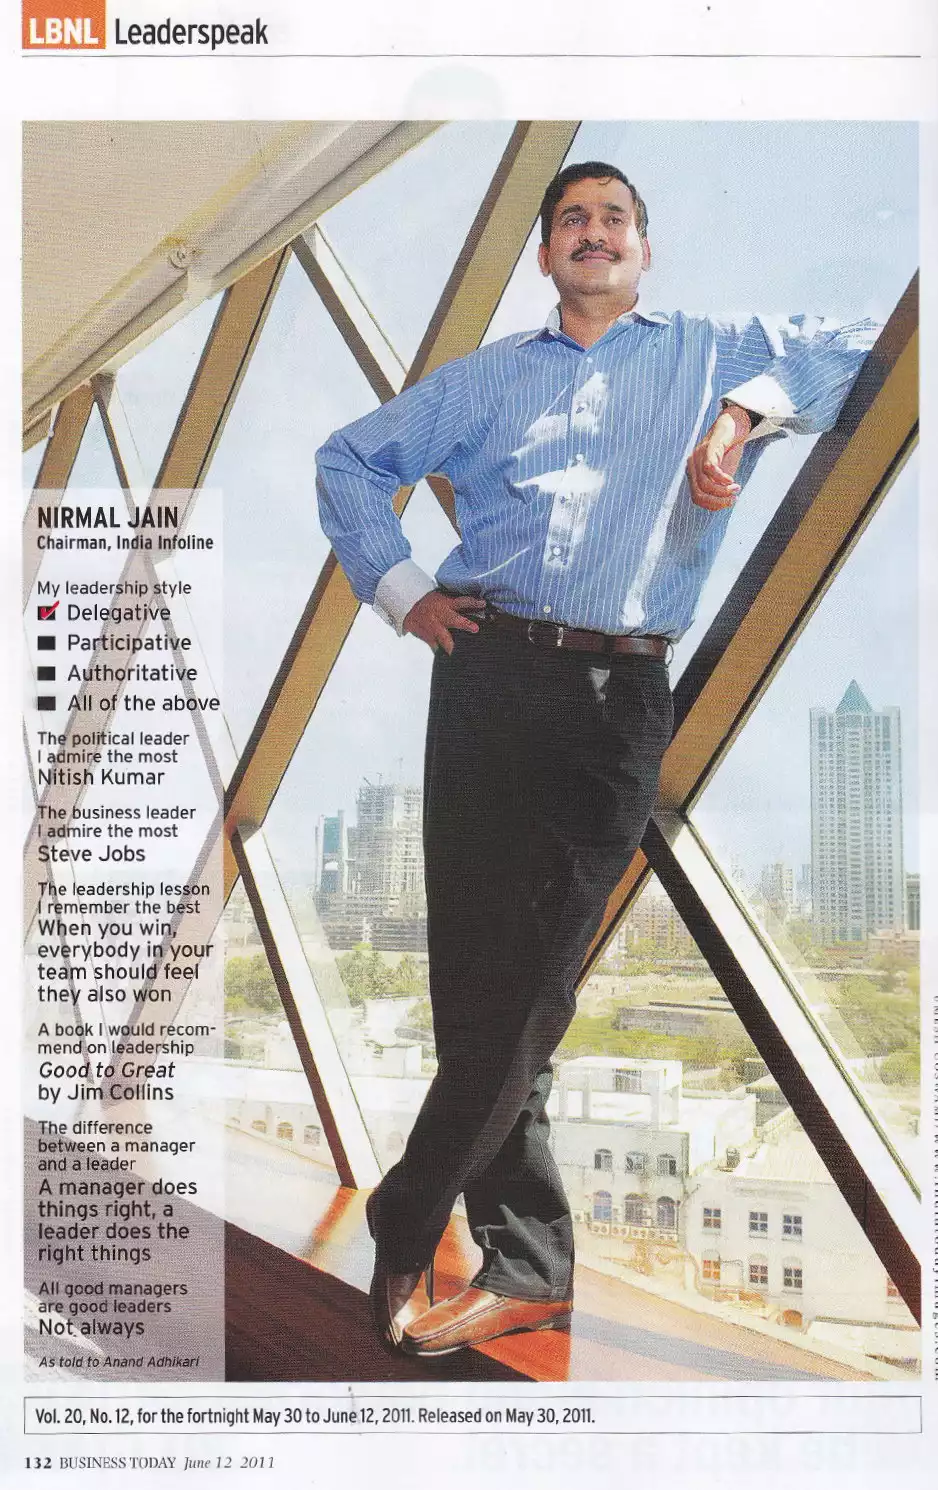 Nirmal Jain's interview on Business Today